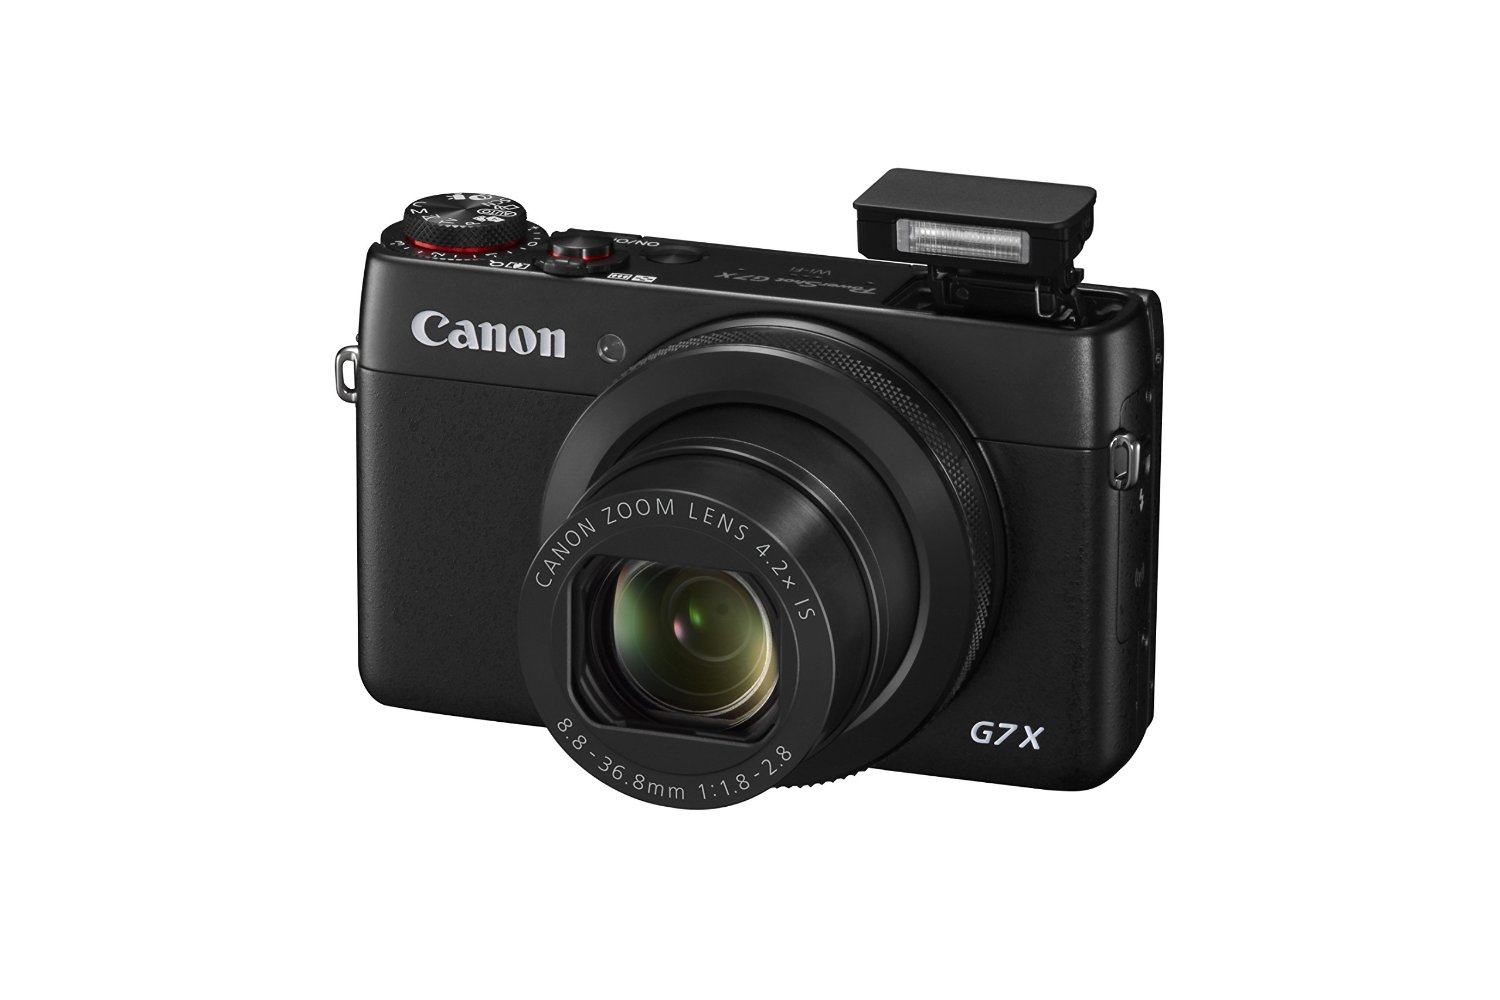 Canon PowerShot G7 X Camera User Guide or Instruction Manual Download